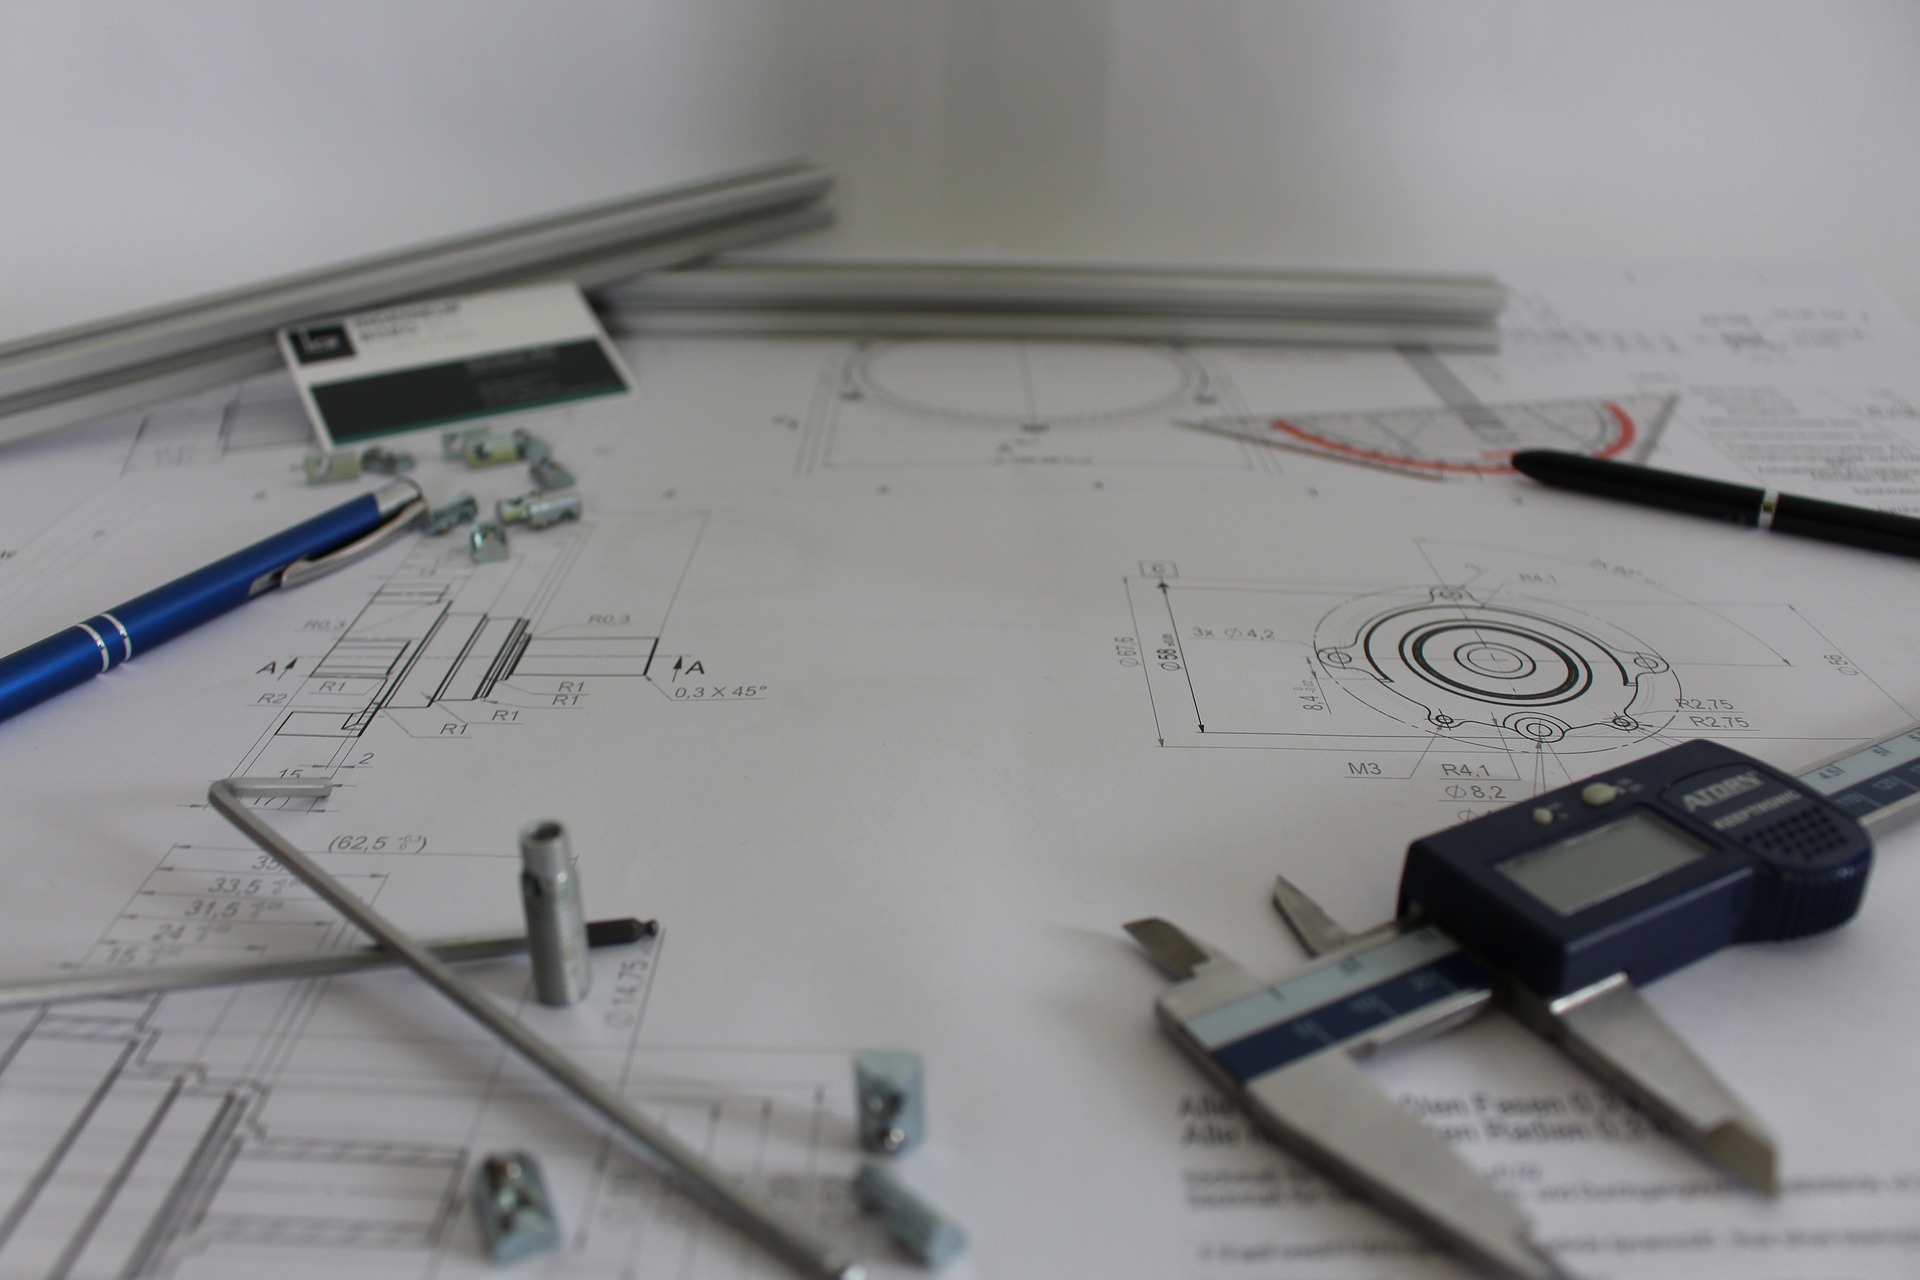 What I as a layperson imagine an engineer's workspace might look like: paper! pencil! calipers! CAD diagrams!